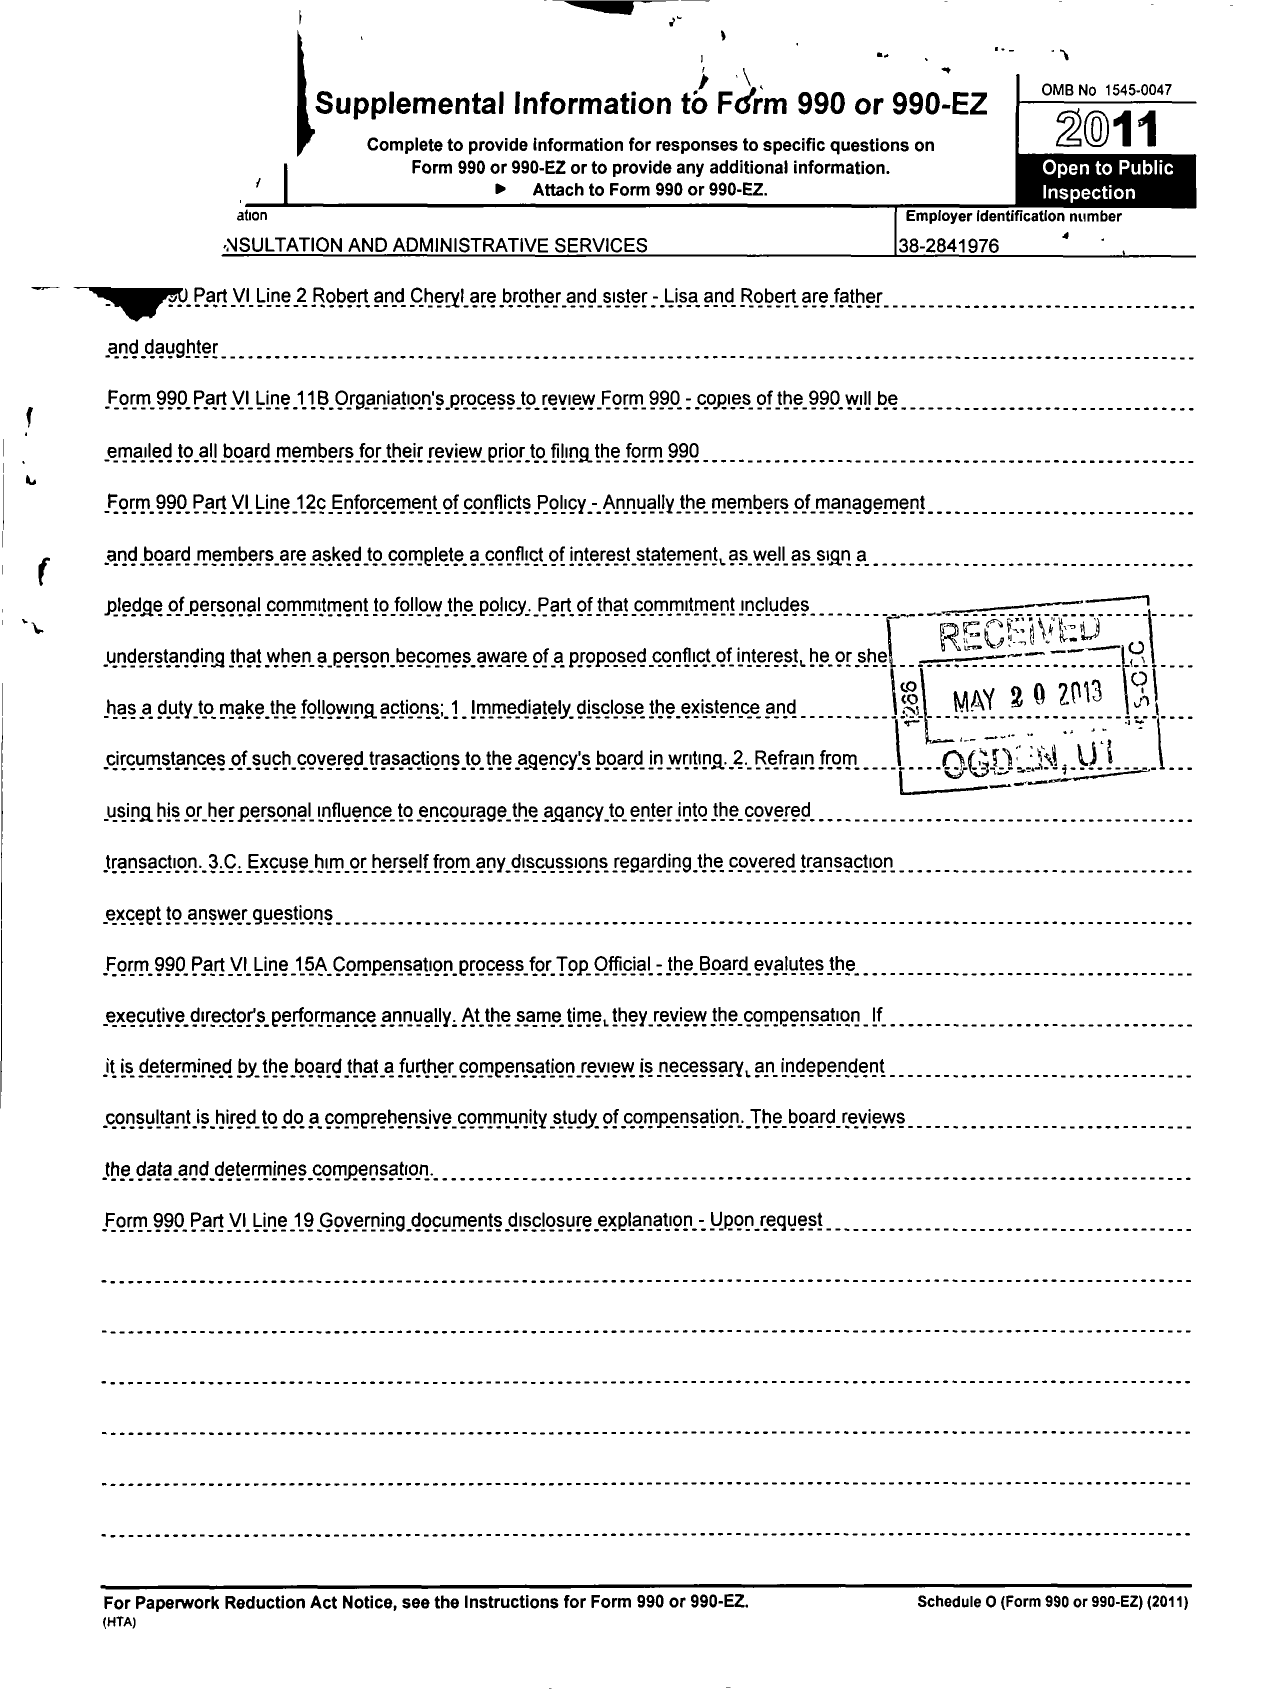 Image of first page of 2011 Form 990R for St Clair Consultation and Administrative Services